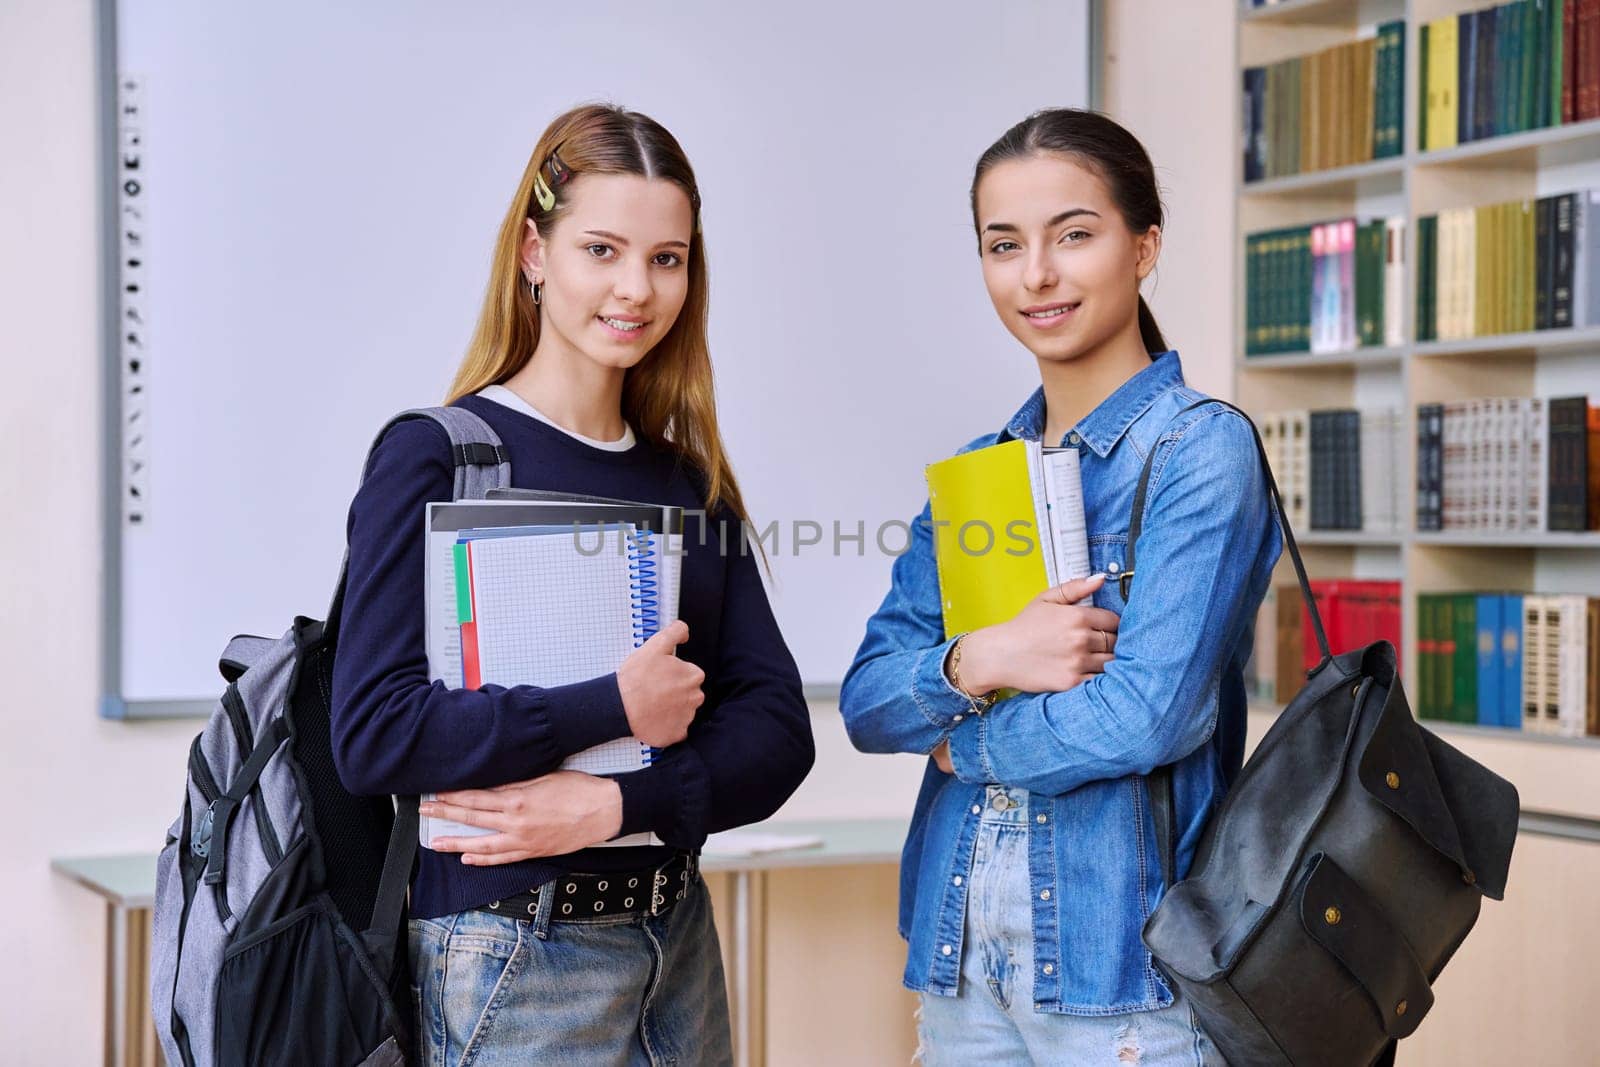 Portrait of two teenage female students together in library classroom. Smiling teenage girls classmates with backpacks textbooks looking at camera. High school education adolescence friendship concept